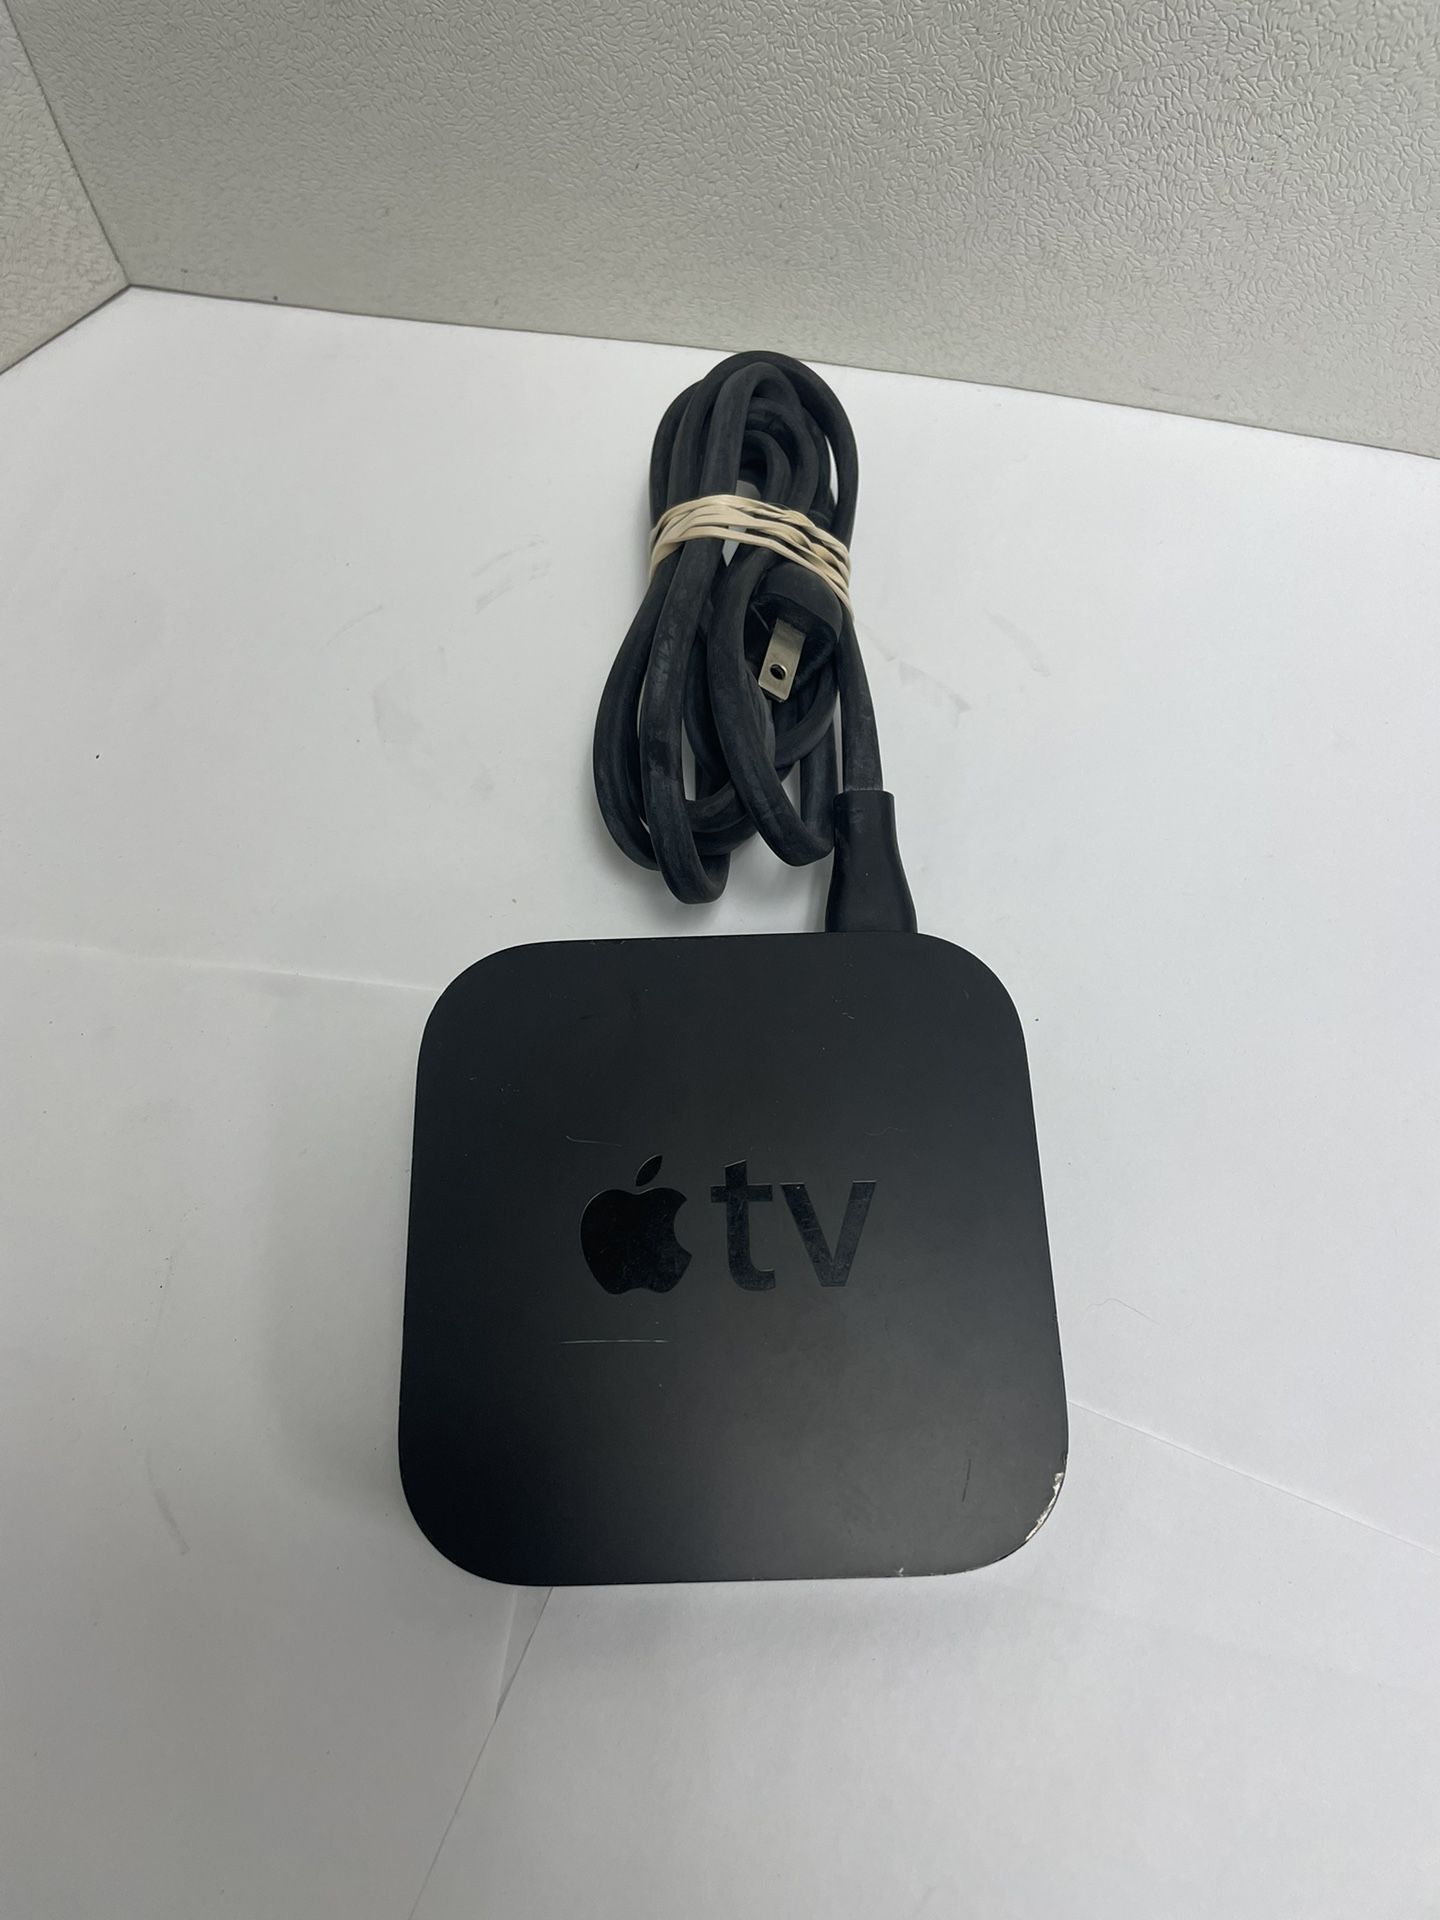 Apple TV (2nd Generation) 8GB Media Streamer - A1378 - No Remote - Tested